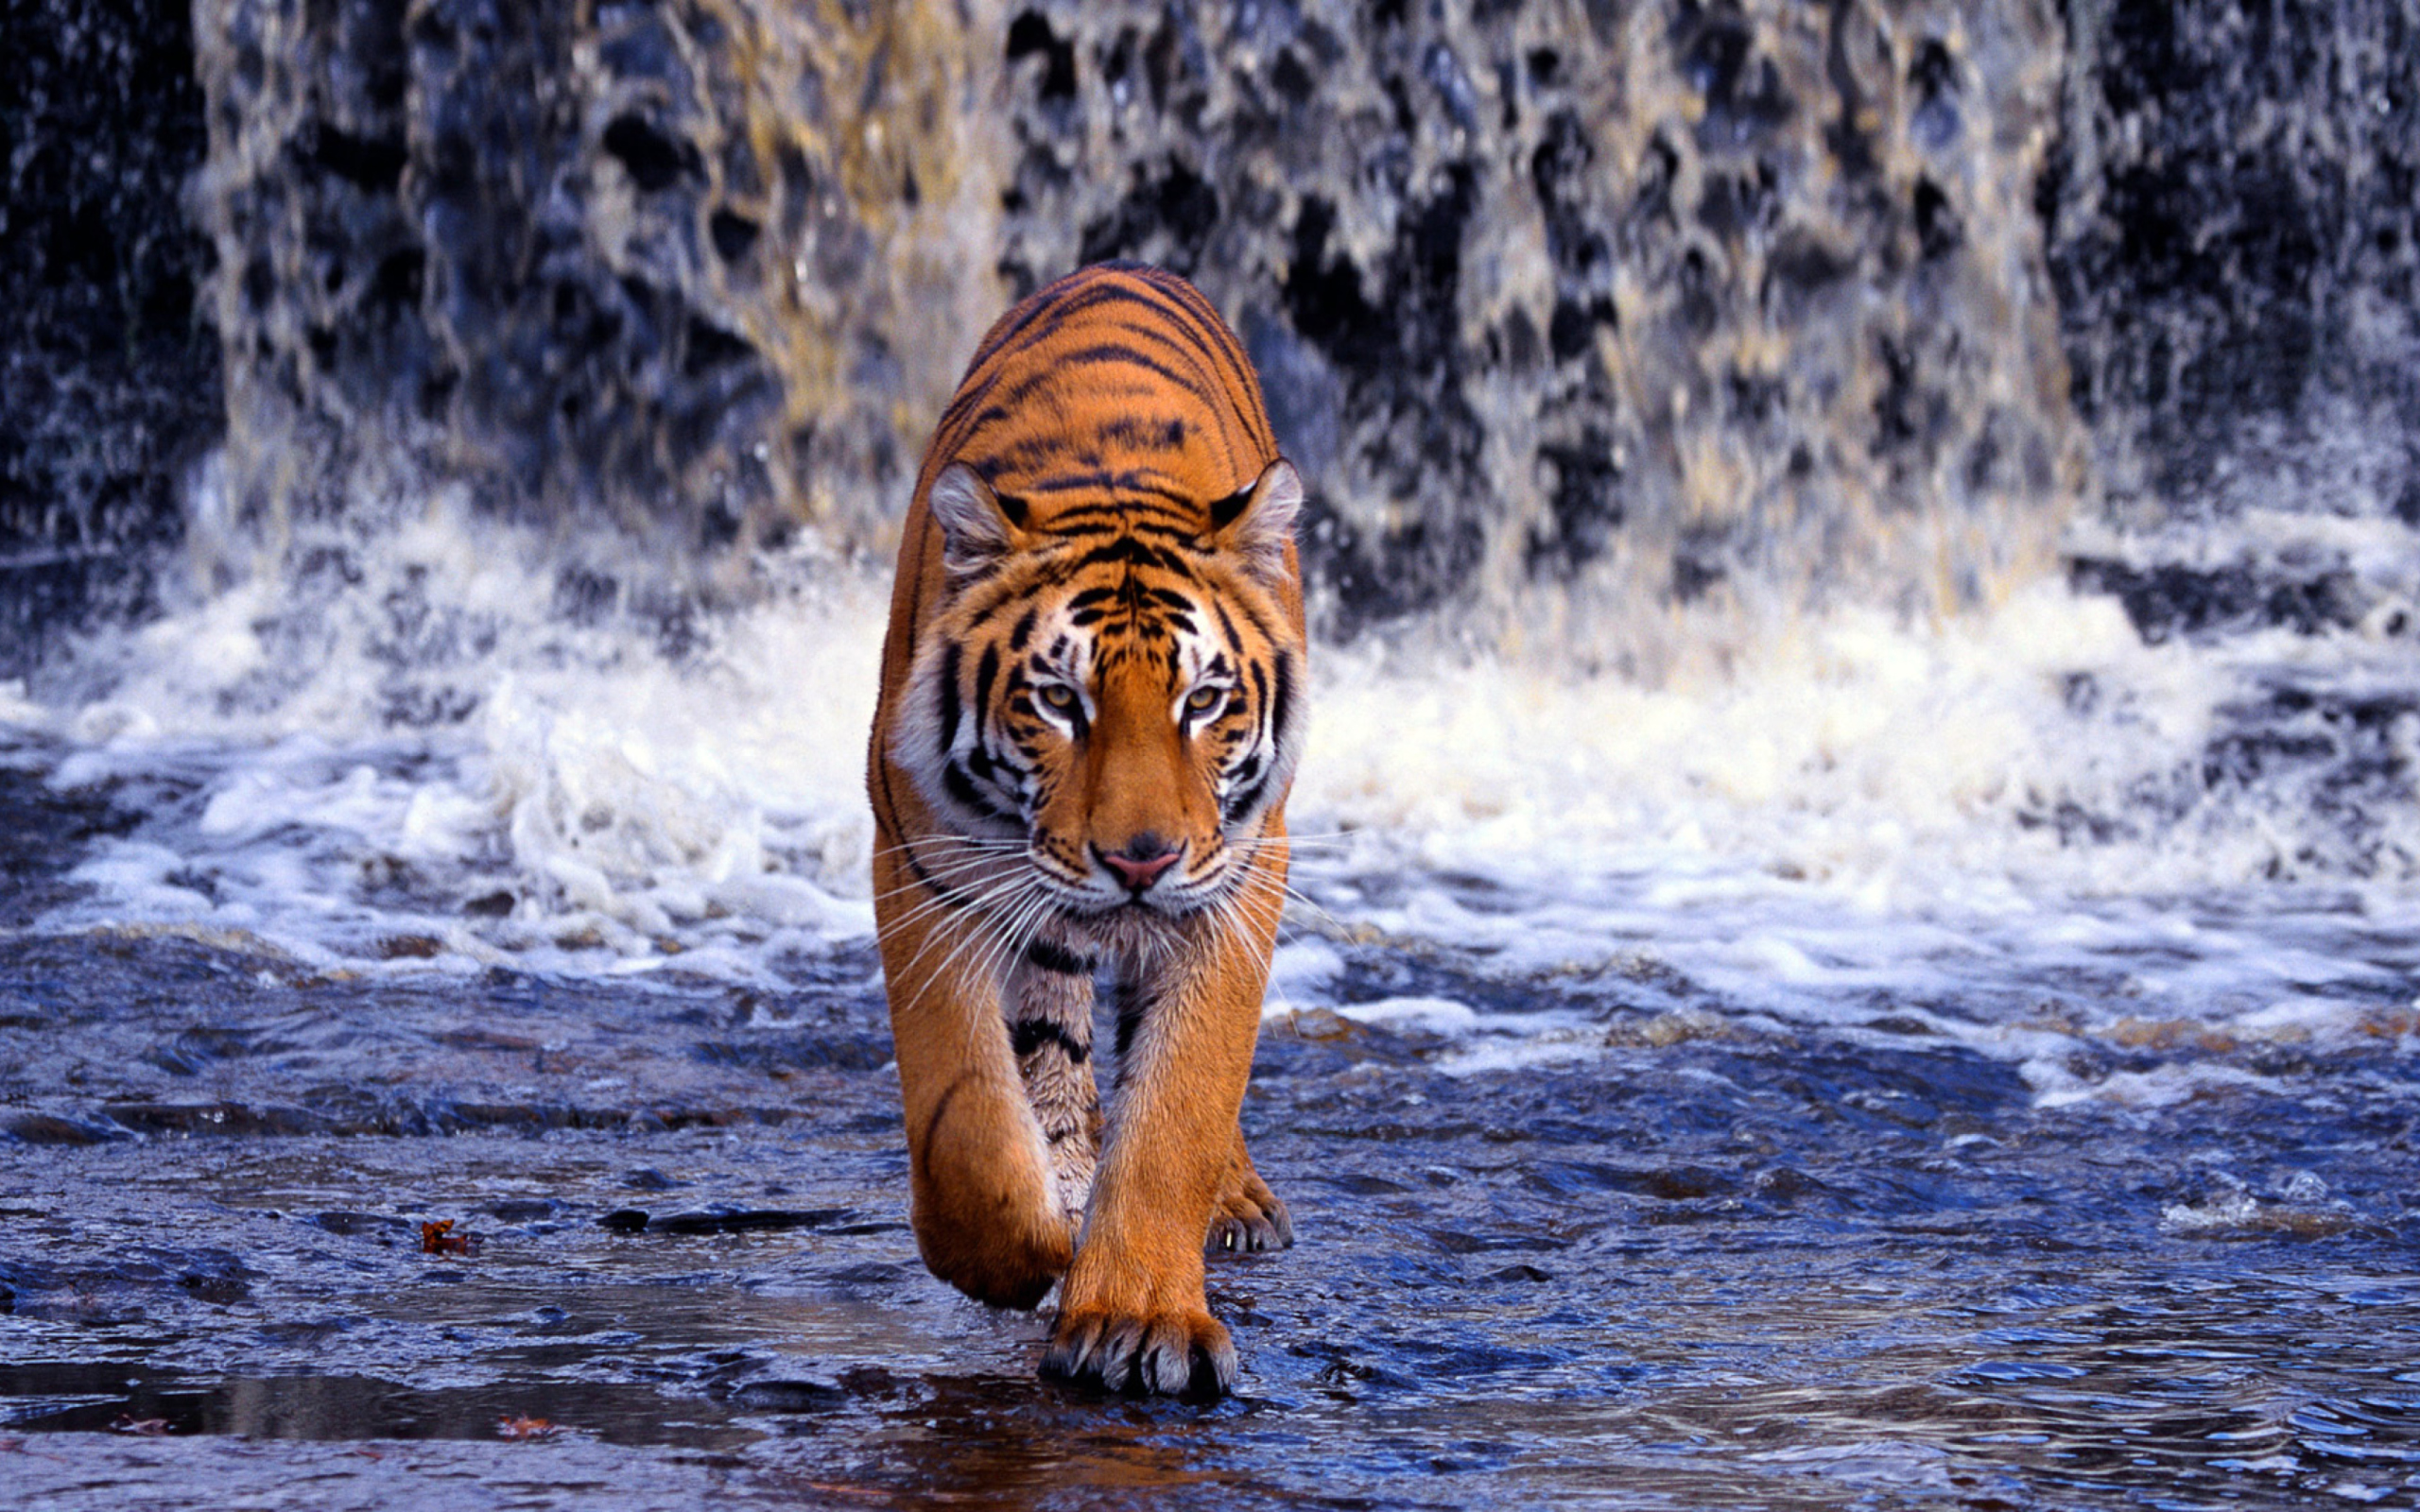 Tiger In Front Of Waterfall wallpaper 2560x1600